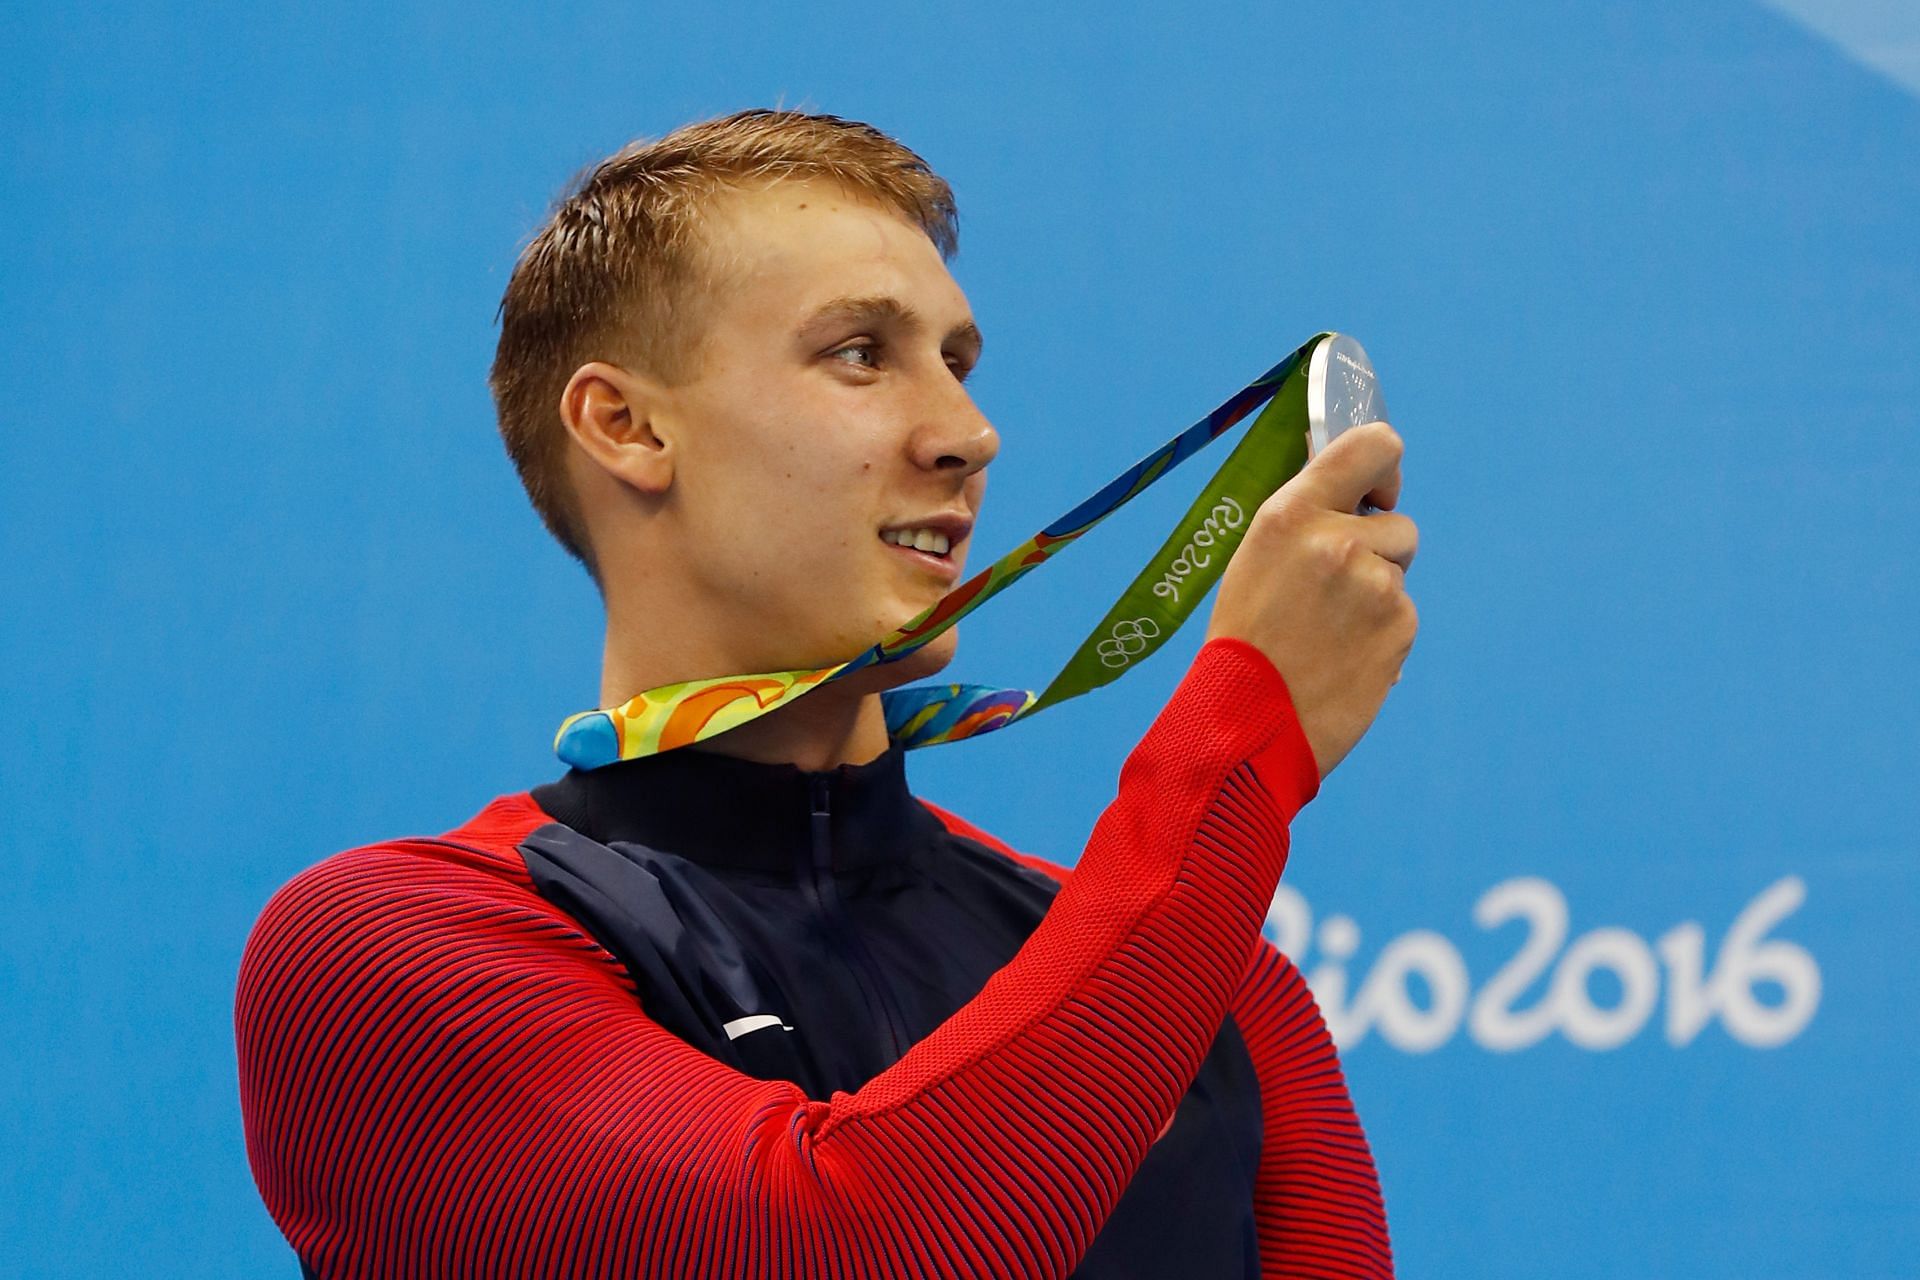 Chase Kalisz wins Silver at the Rio Olympics 2016